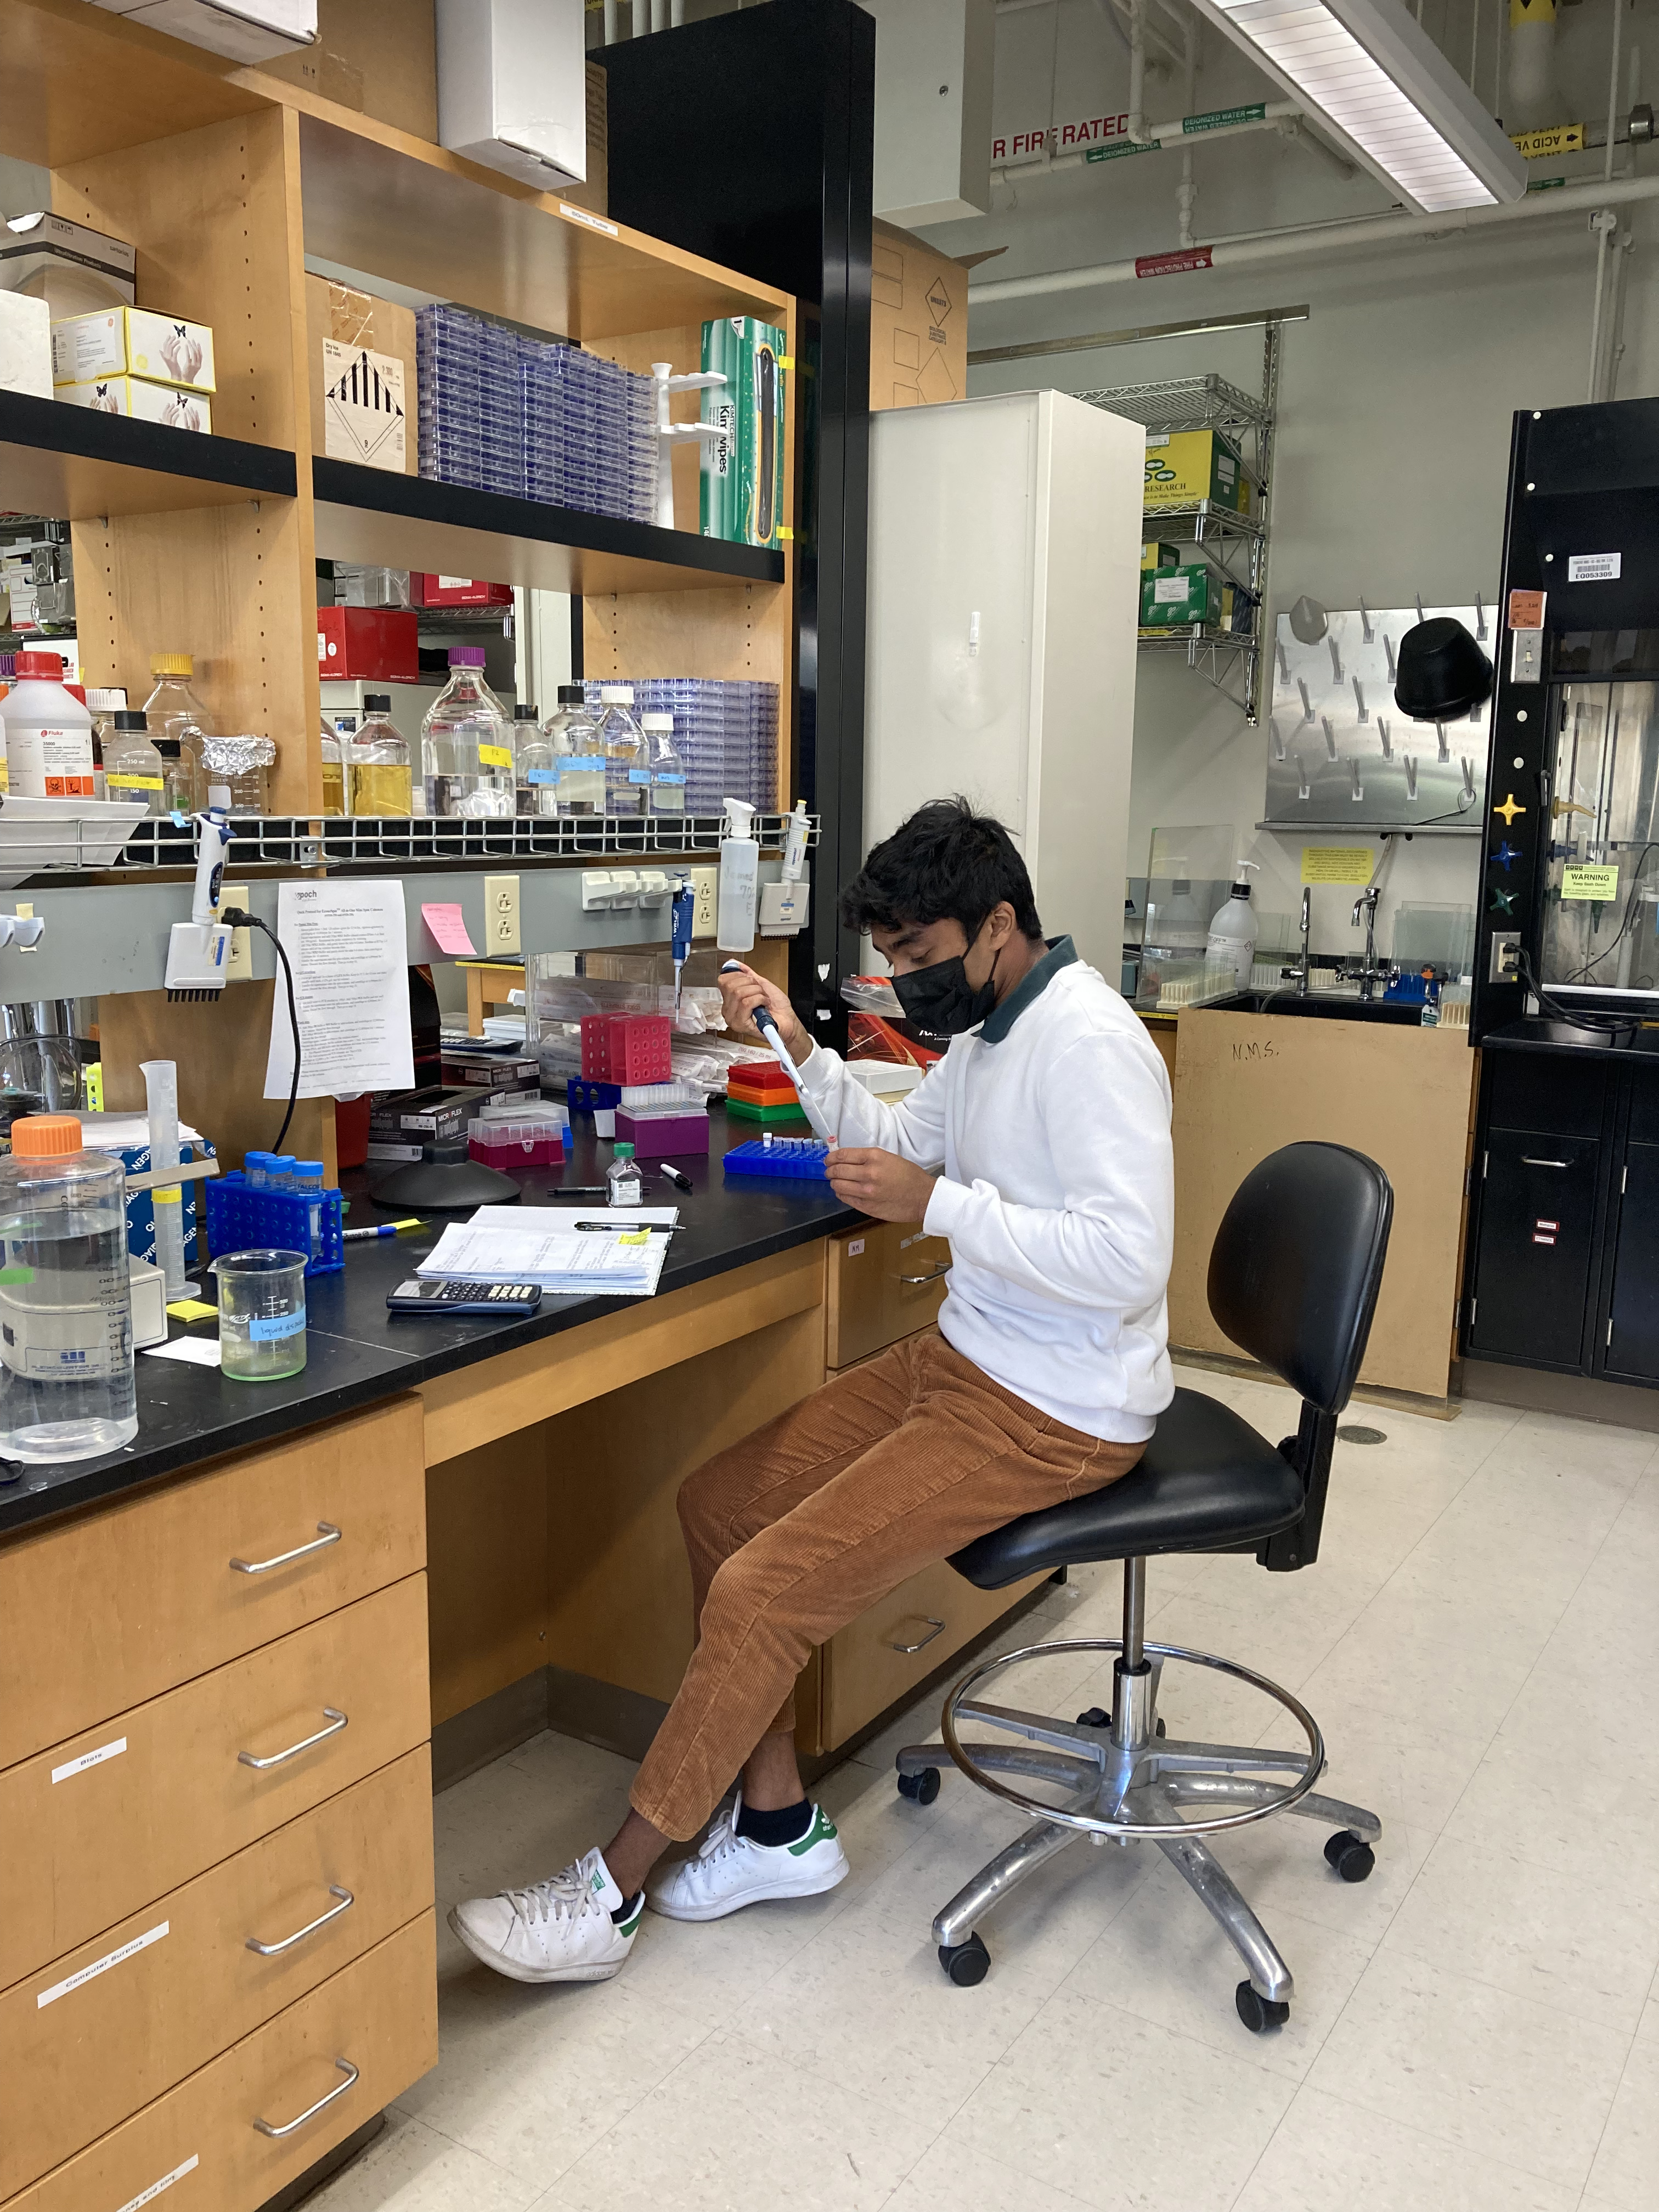 Noah Mathai, a student at the University of Texas works in a lab to help support research and train as a future medical leader.